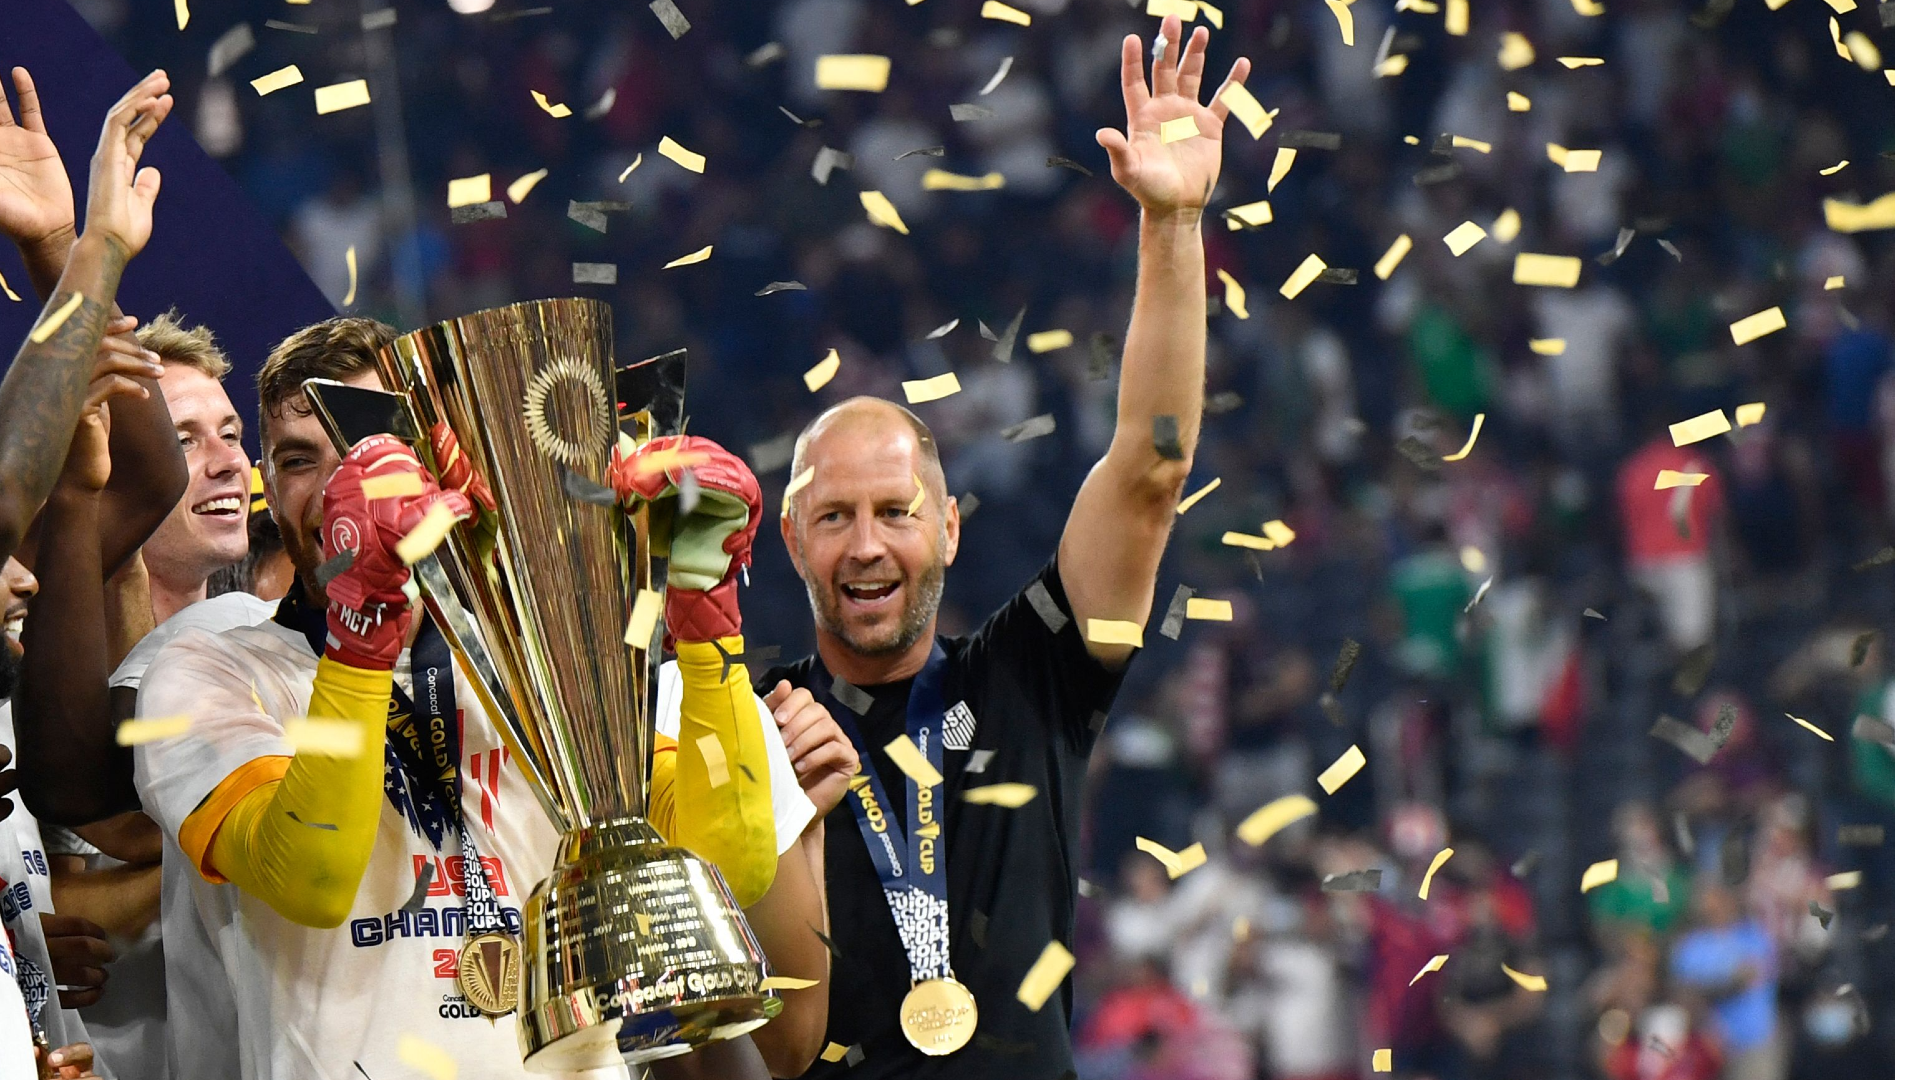 'I just wanted it so bad for them' - Berhalter hails 'relentless' USMNT after incredible win over Mexico